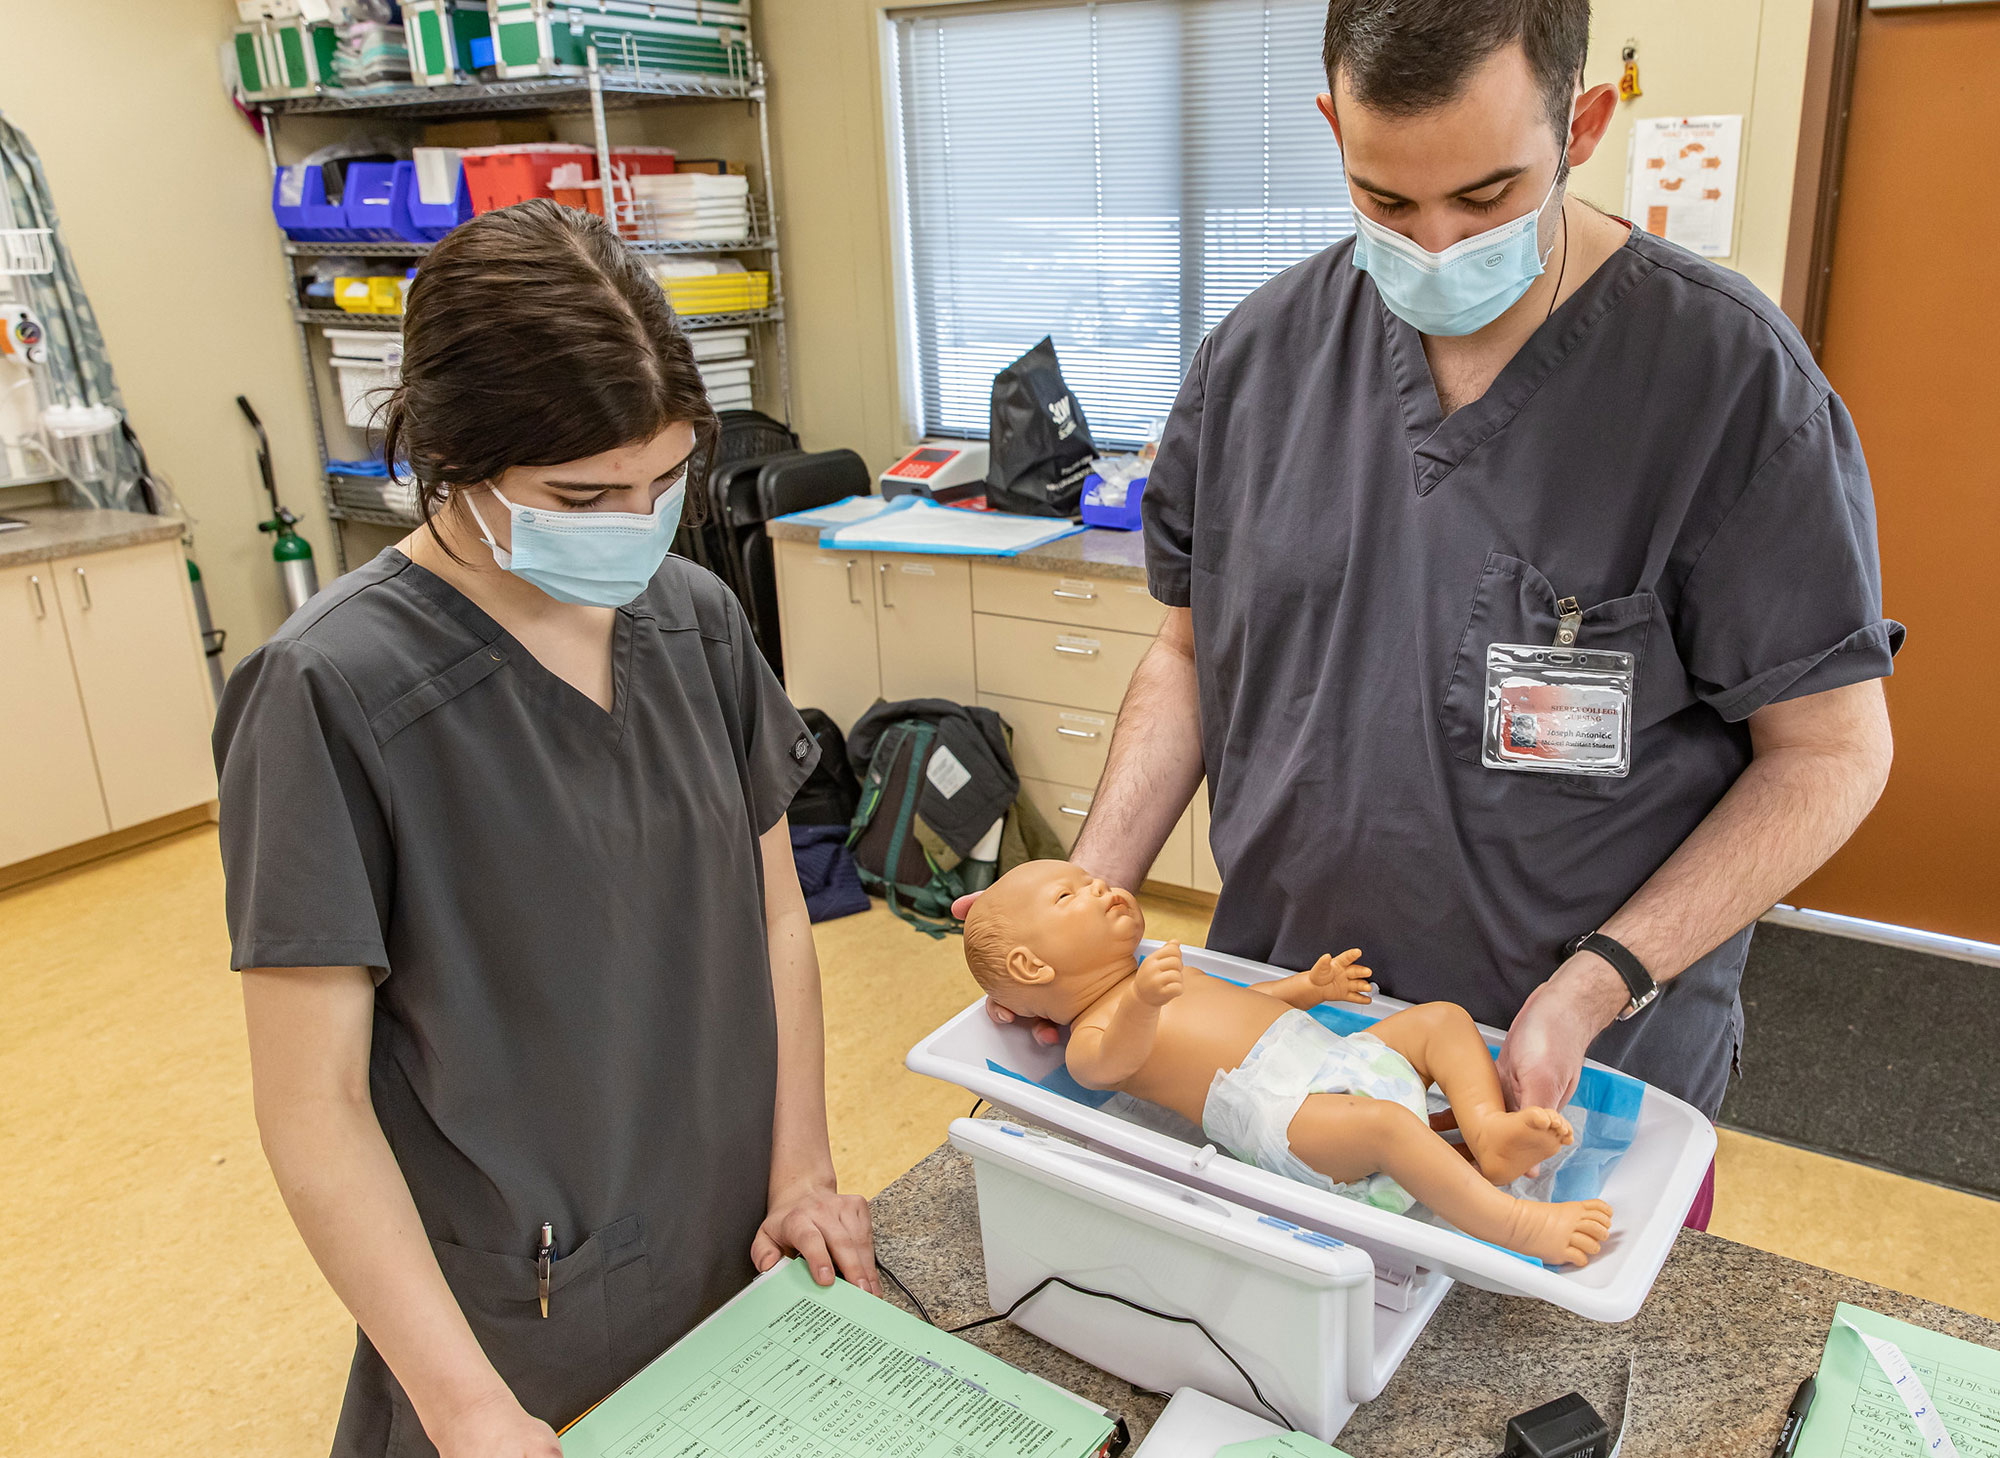 Medical Assistant students practicing tasks on simulated baby.